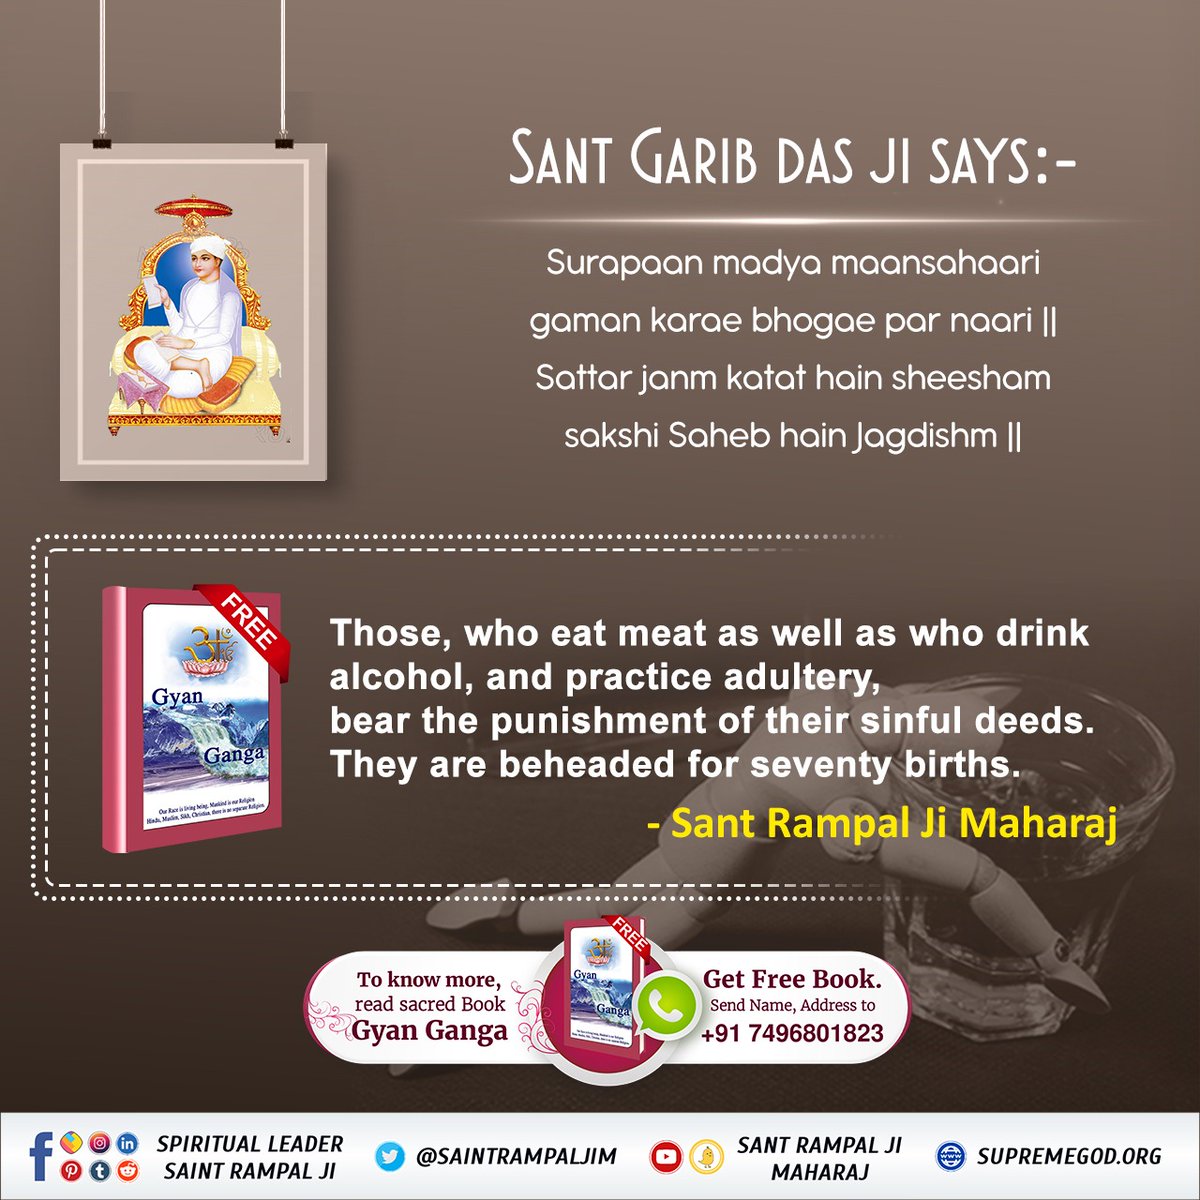 Sant Garib das ji says:-
Those, who eat meat as well as who drink alcohol, and commit adultery, bear the punishment of their sinful deeds. 

#WorldDrugDay 
International Day